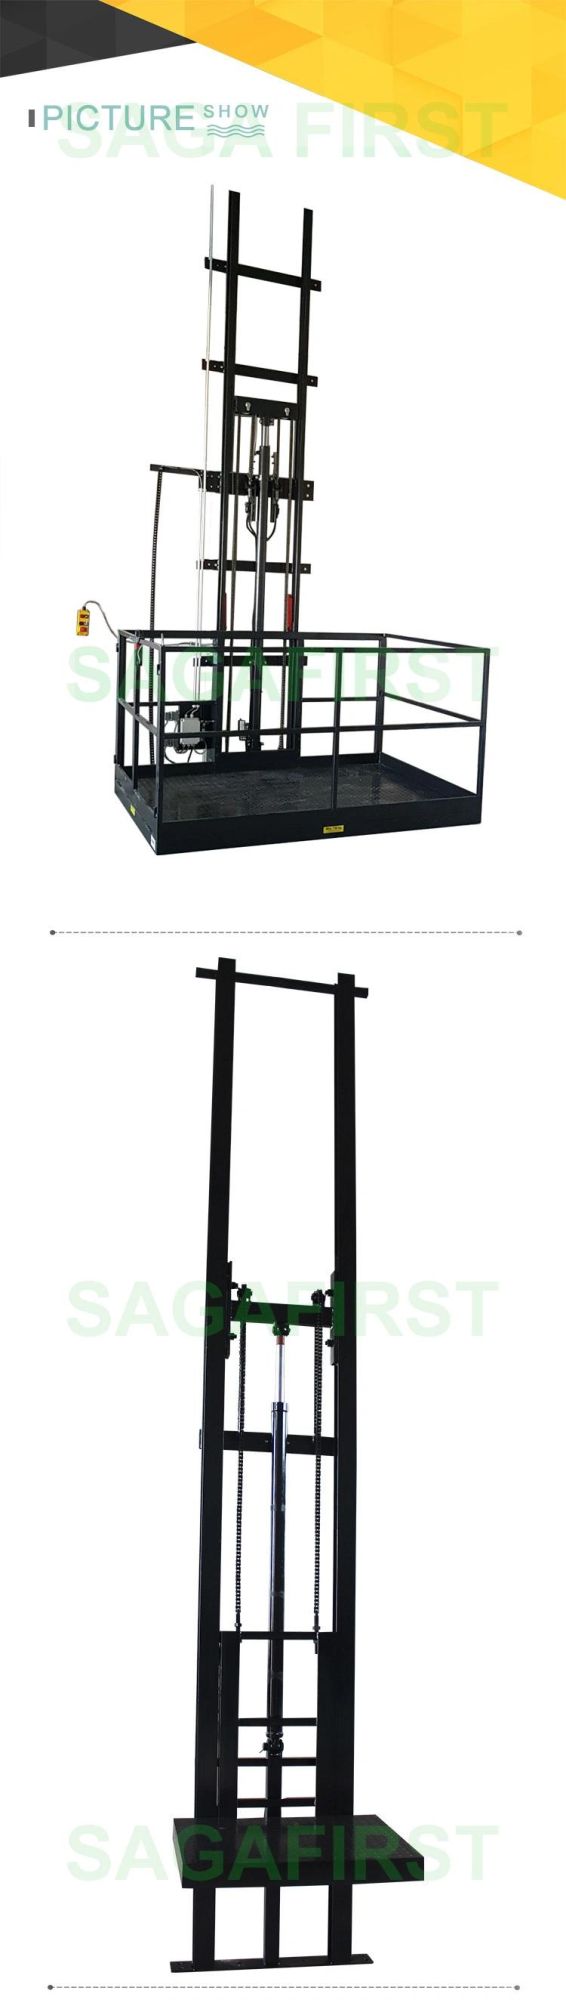 10ton Industrial Vertical Hydraulic Goods Lift Machine with Ce